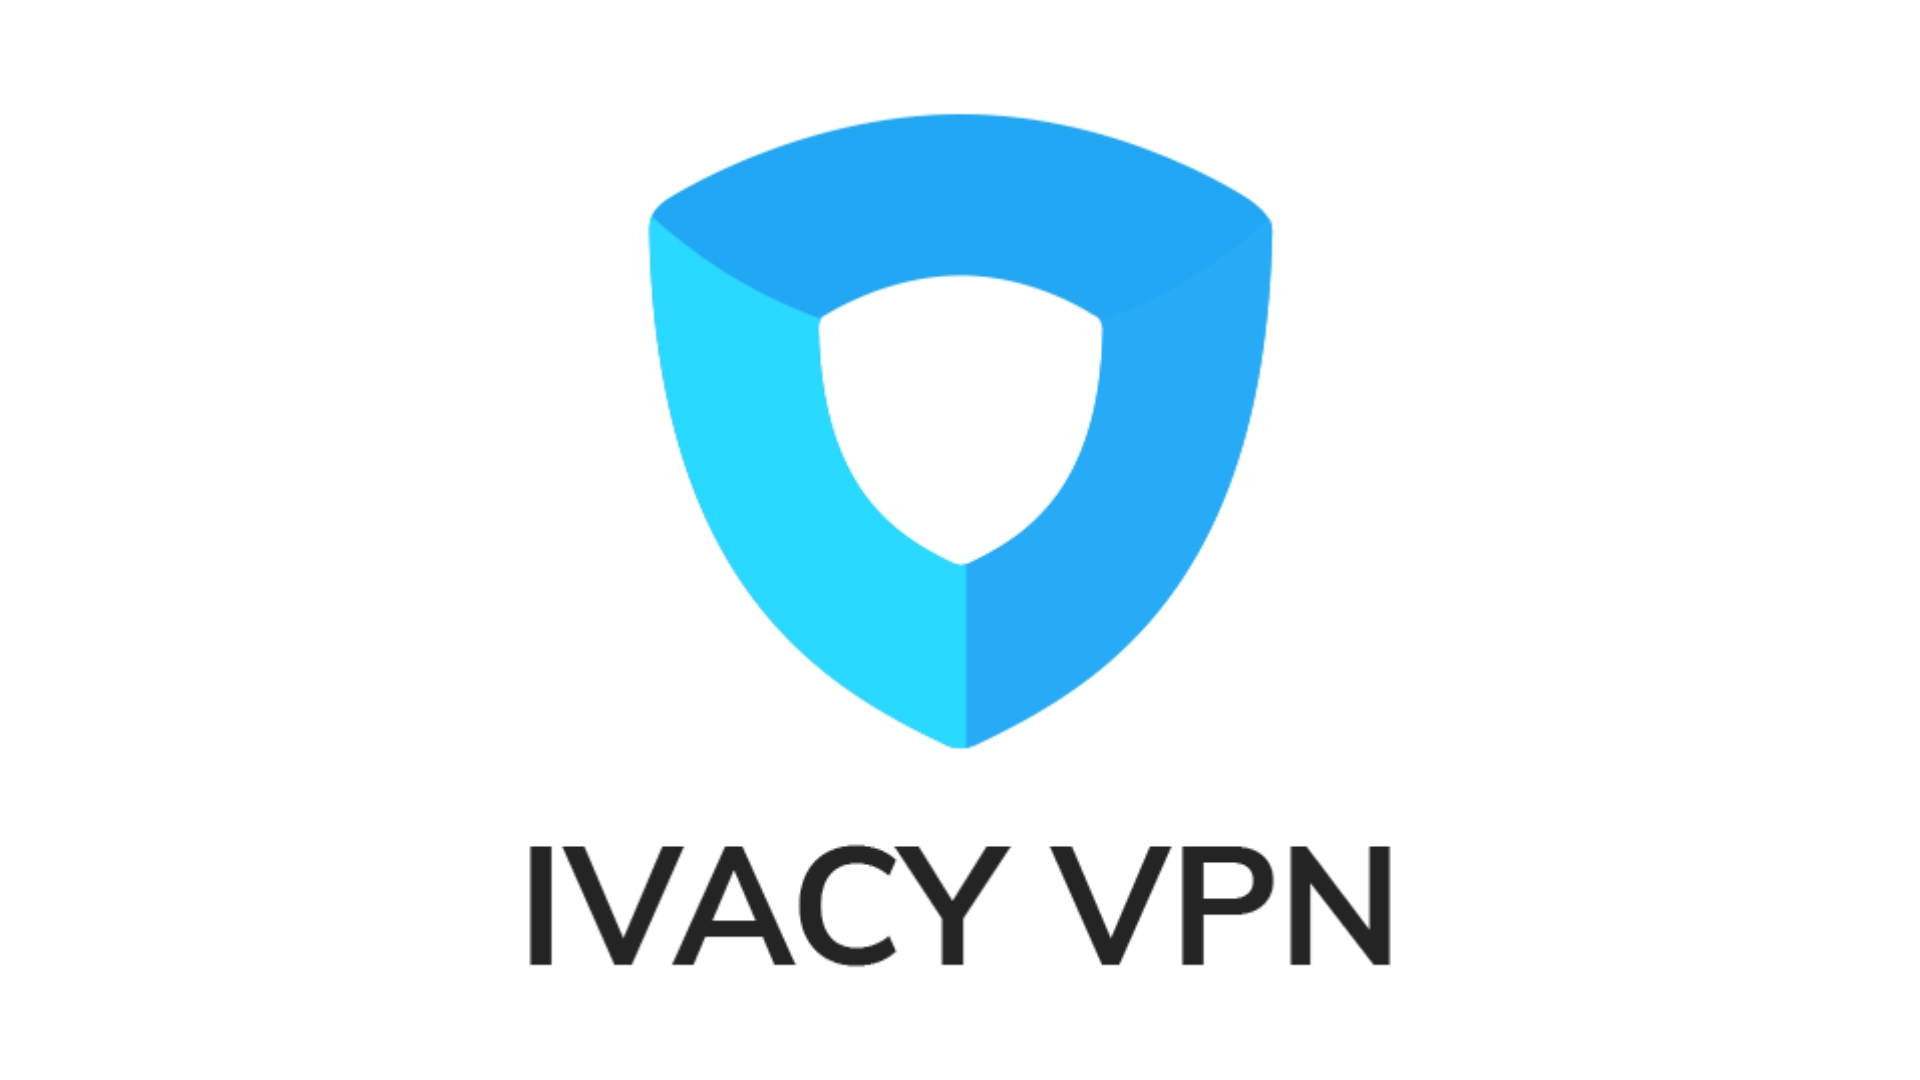 VPN servers for Ivacy VPN. Image shows the company logo.